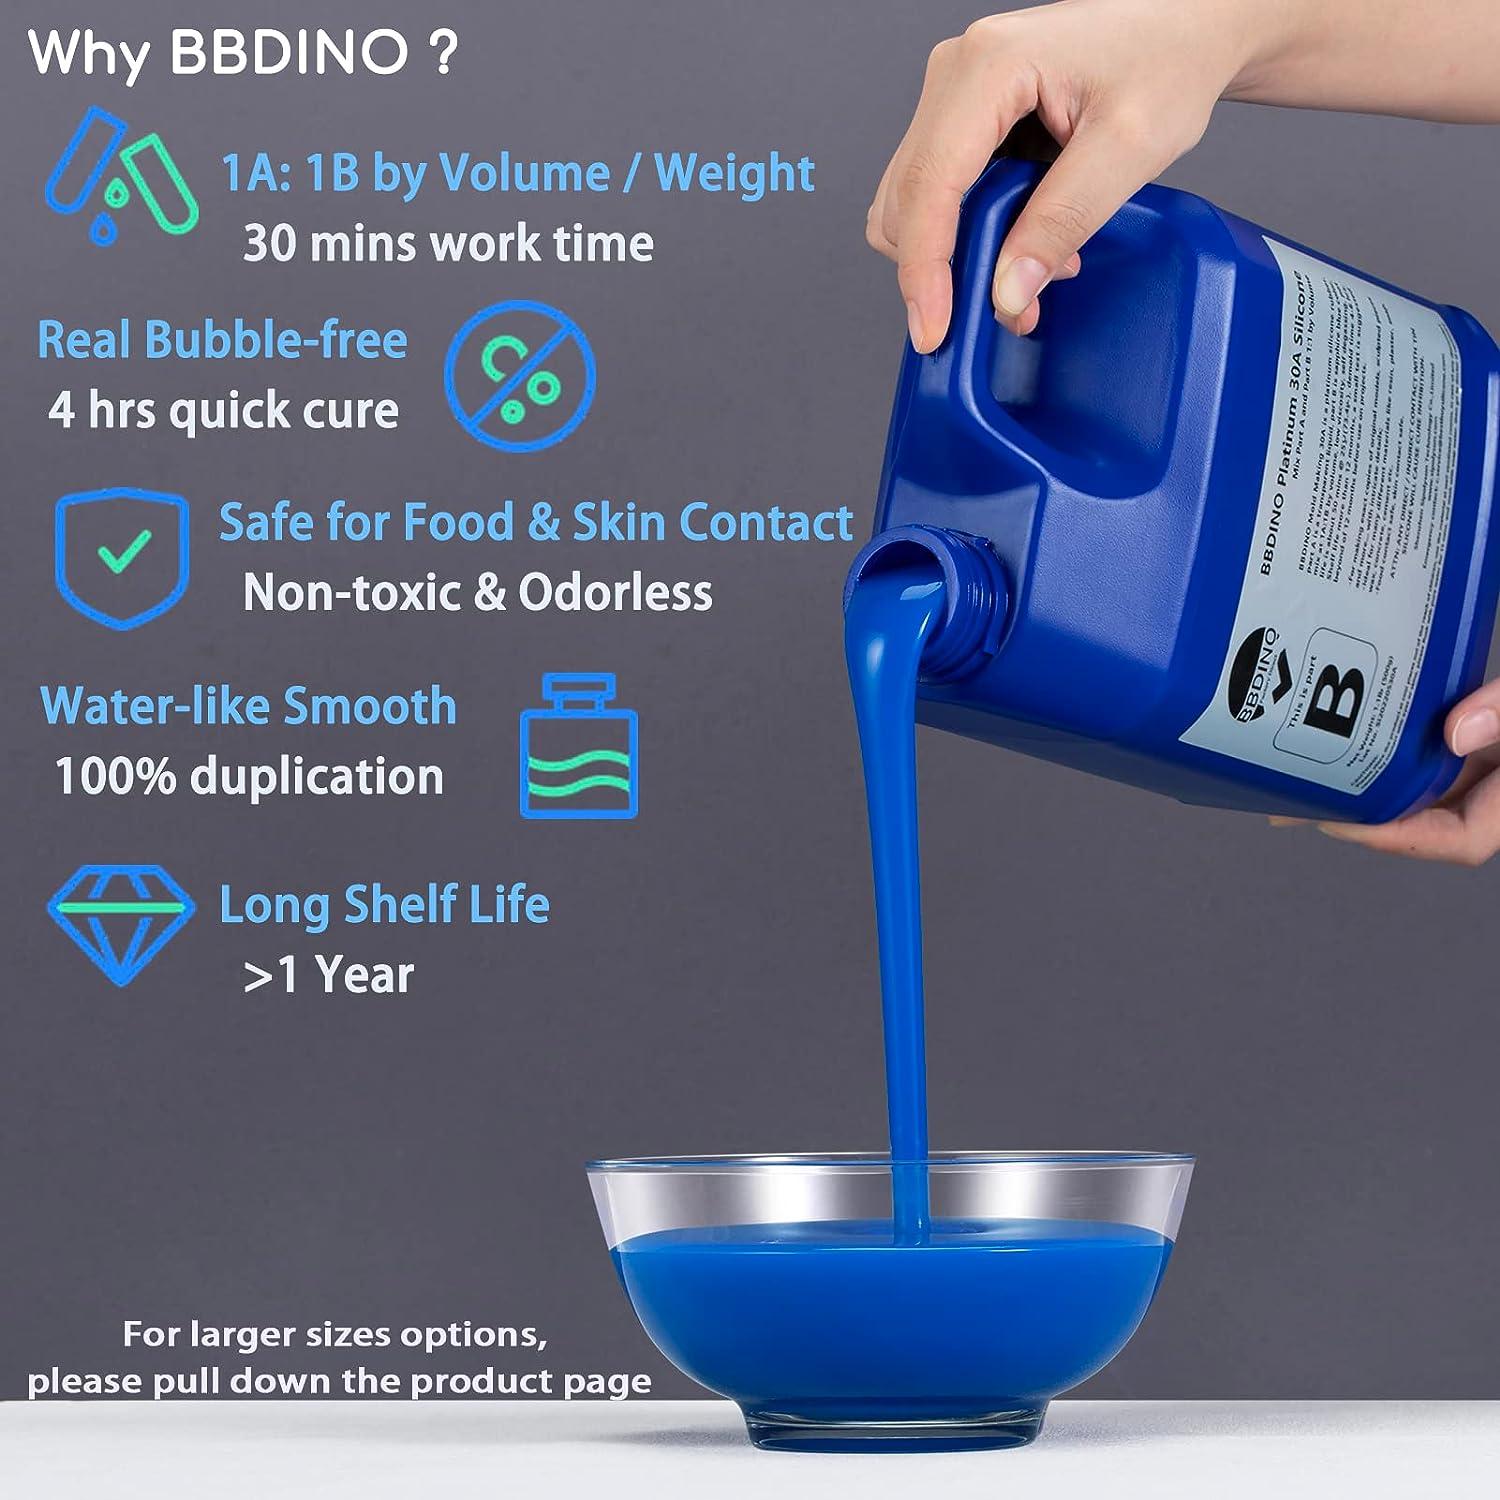 BBDINO Silicone Mold Making Kit 20A, Mold Making Silicone Translucent,  Liquid Silicone for Mold Making 1:1 by Volume, Ideal for Casting Resin,  Soap